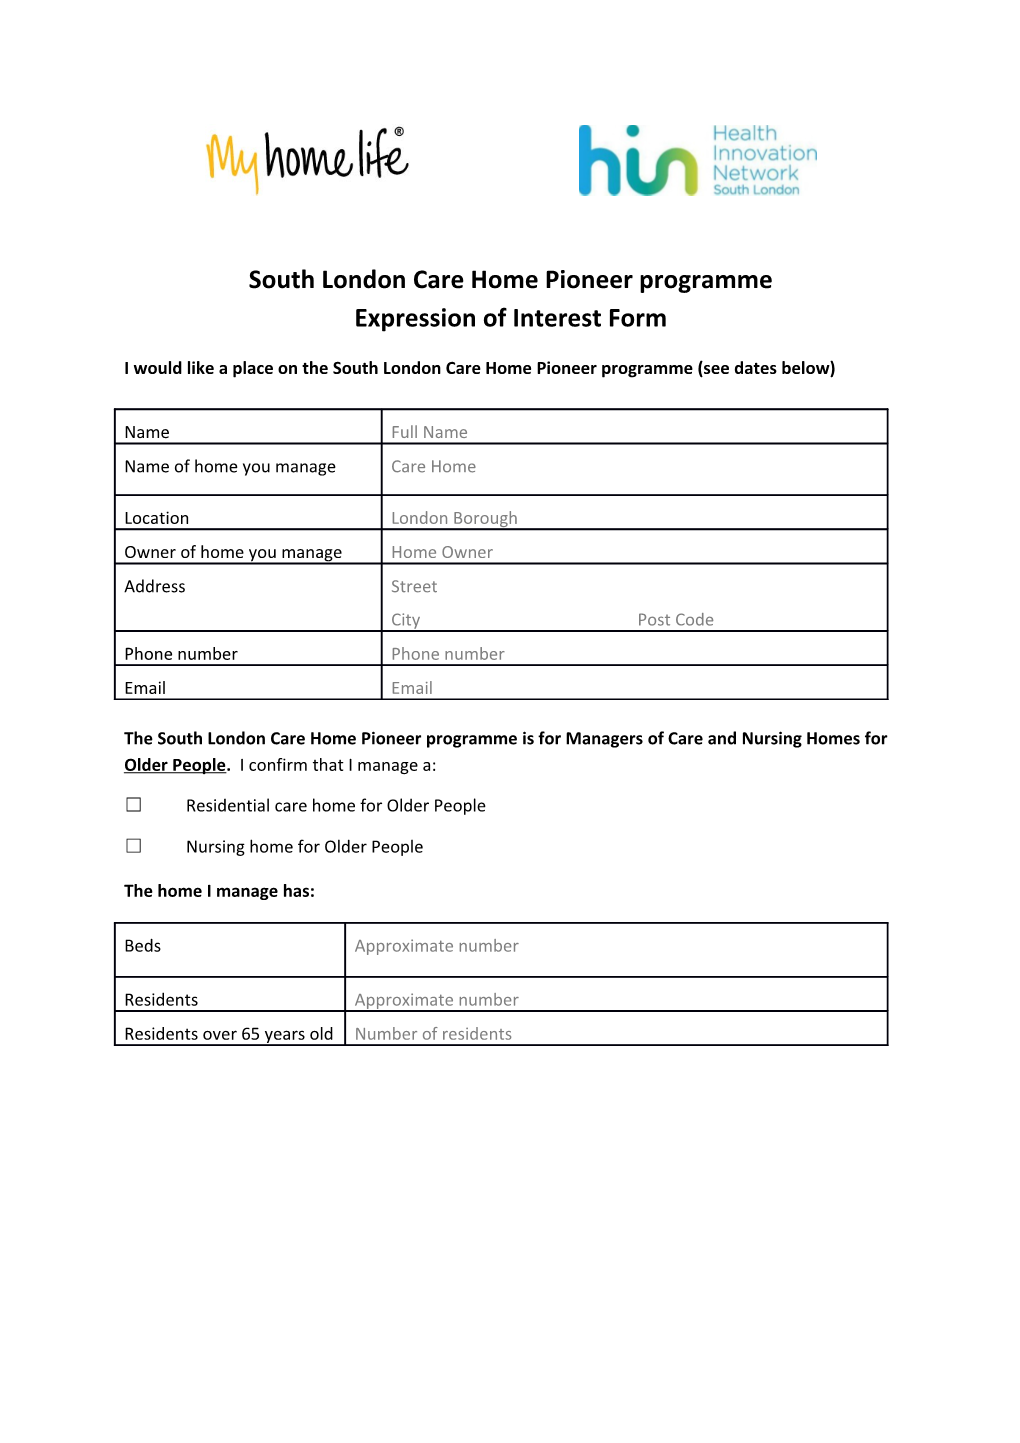 South London Care Home Pioneer Programme Expression of Interest Form